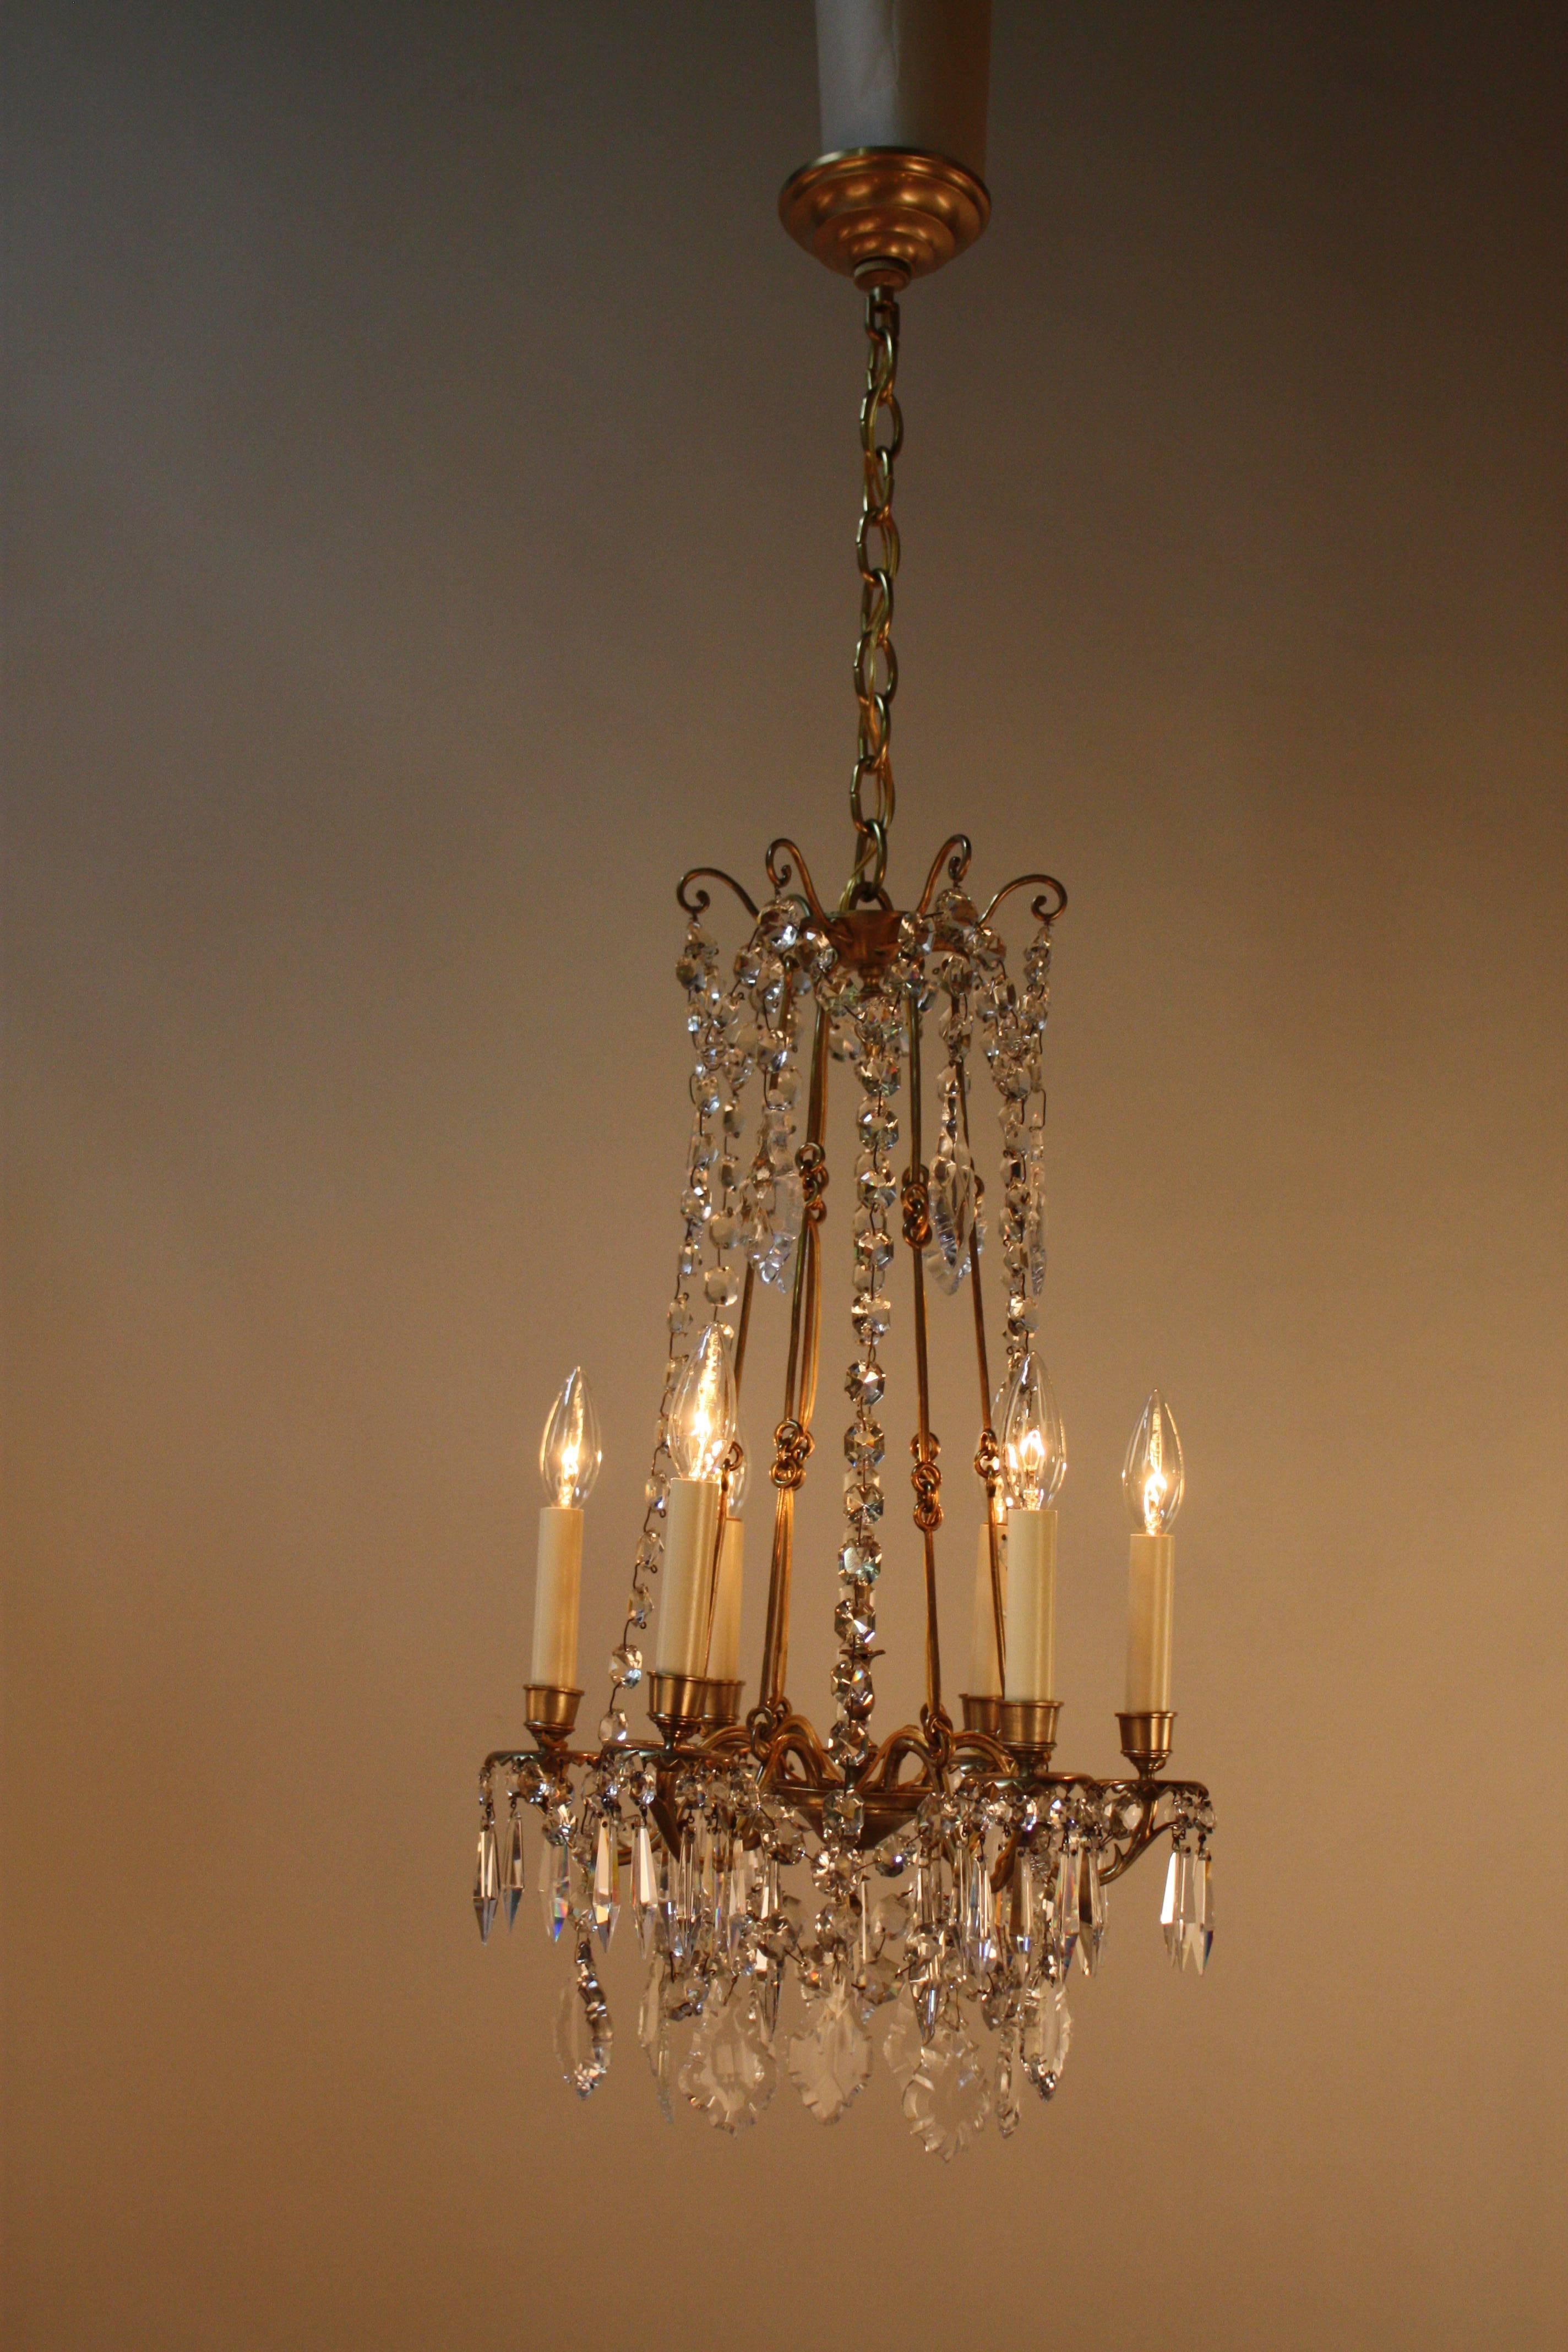 Elegant six-light 19th century crystal chandelier. Originally burning candle that professorially has been electrified.